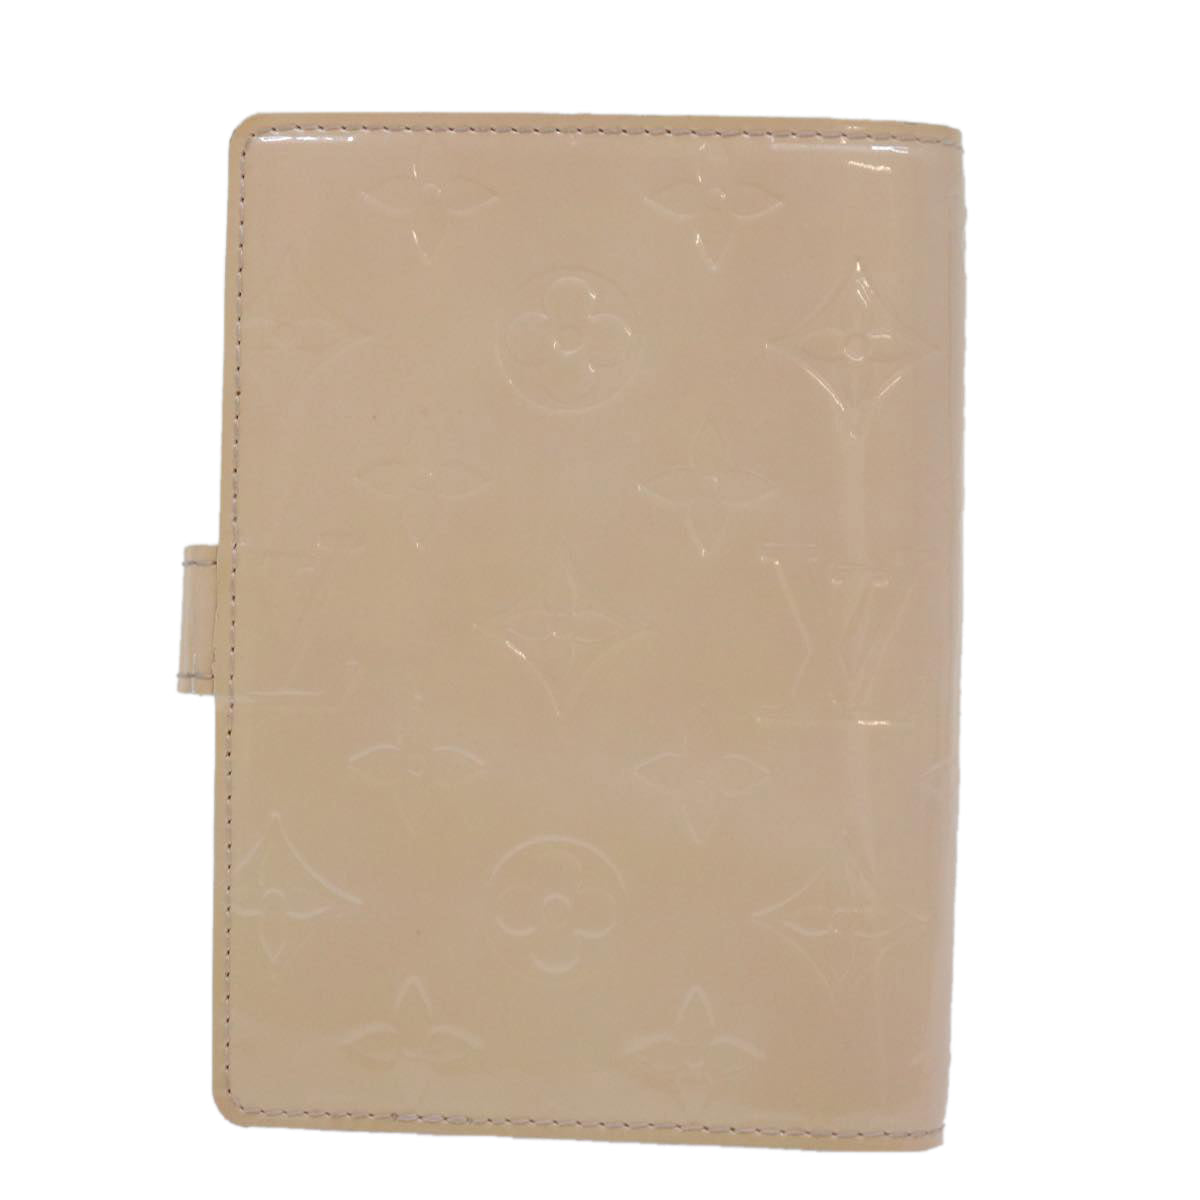 LOUIS VUITTON Vernis Agenda PM Day Planner Cover Pink R2101F LV Auth hk1004